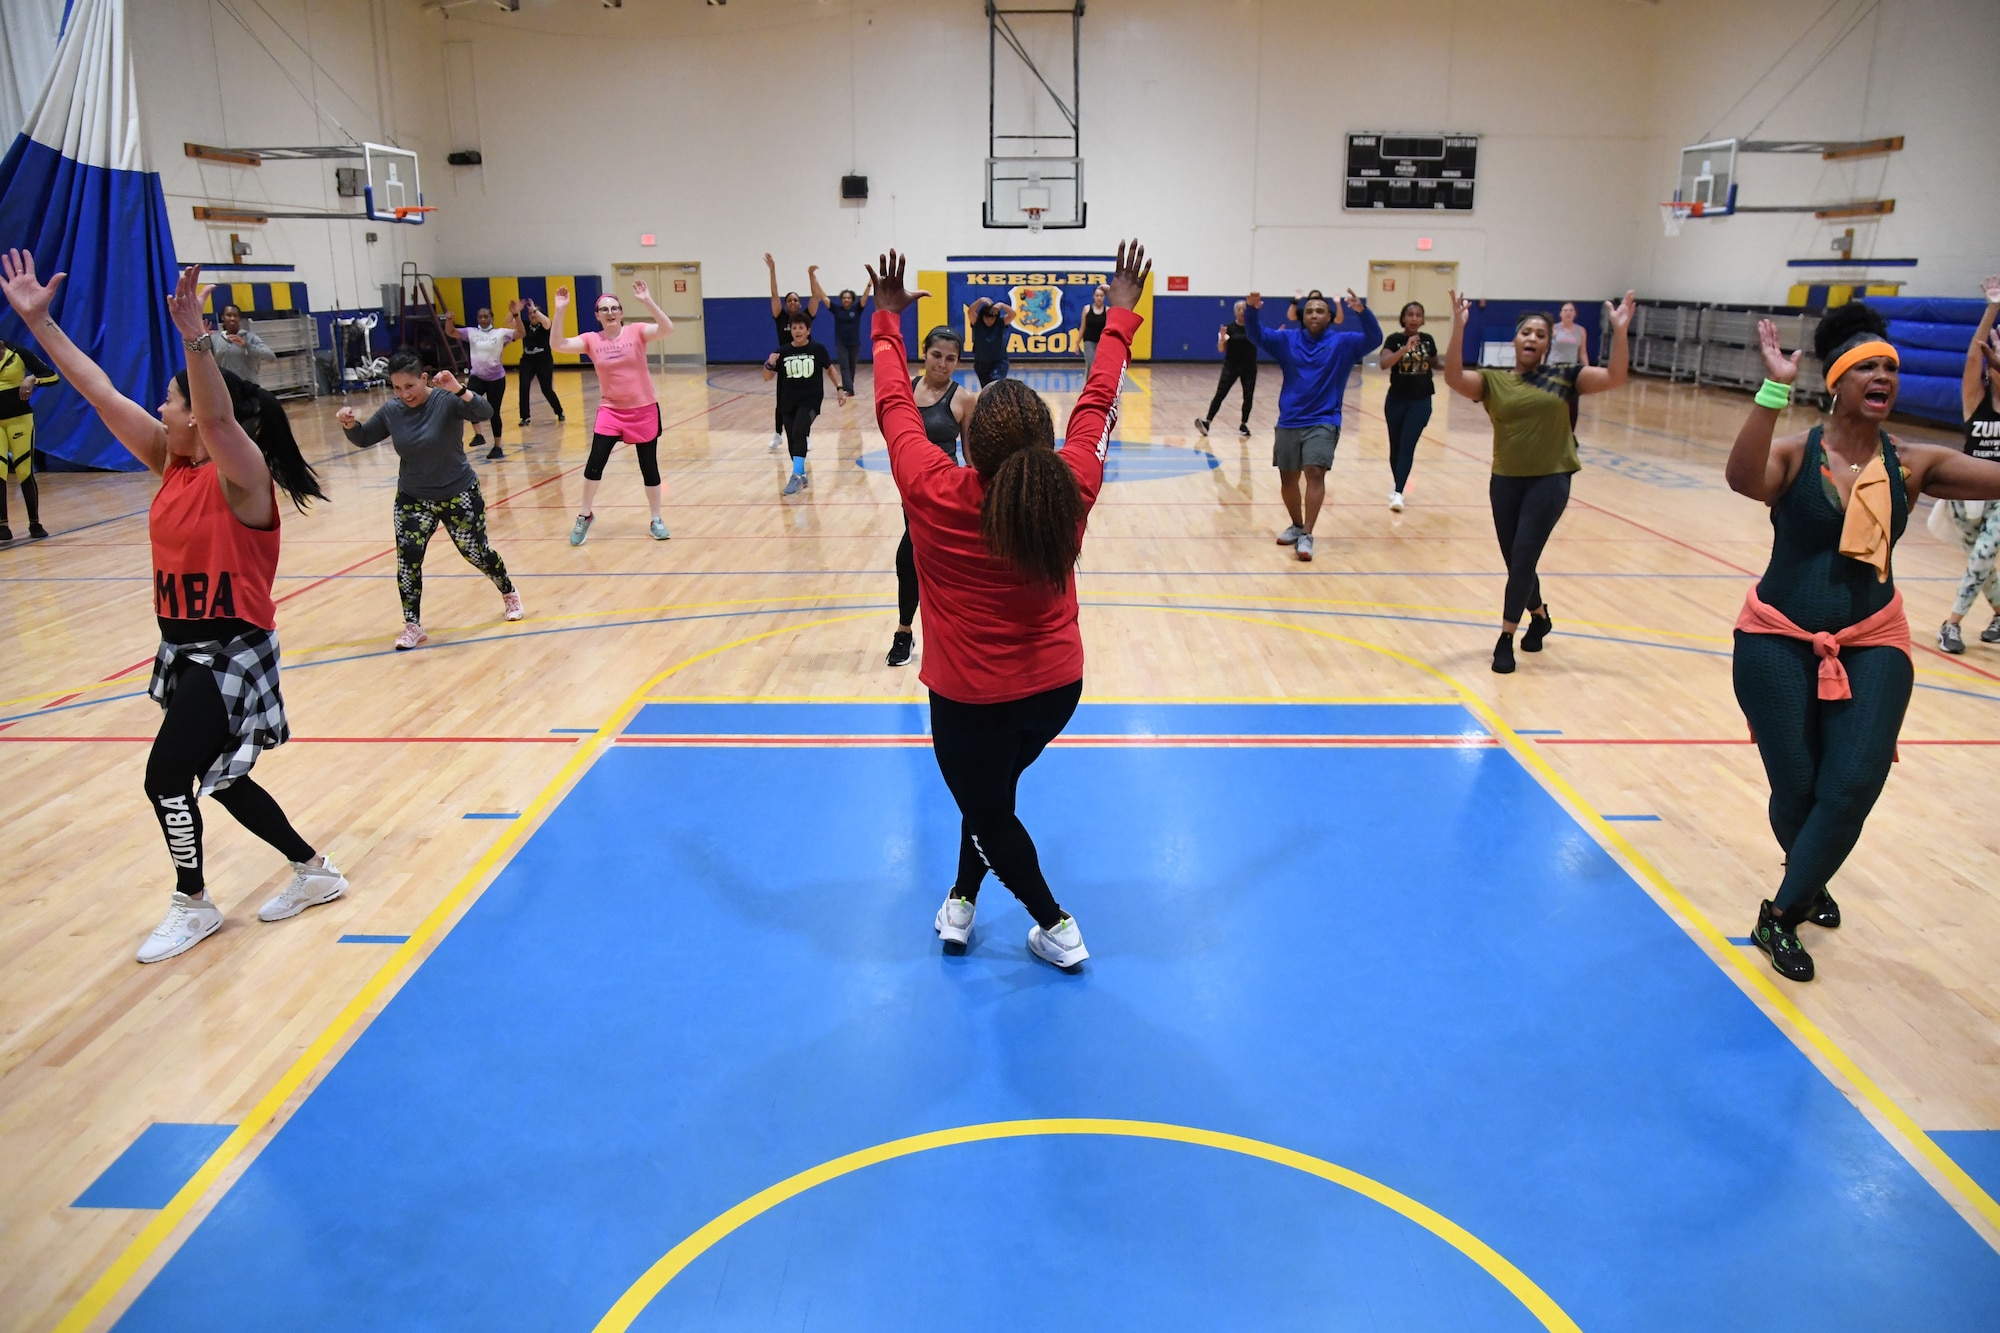 Keesler personnel participate in a Zumba Dance Class inside the Blake Fitness Center at Keesler Air Force Base, Mississippi, Feb. 8, 2022. The Black History Month Observance Committee hosted event in celebration of Black History Month, which is celebrated throughout February. This year's theme is Black Health & Wellness. (U.S. Air Force photo by Kemberly Groue)